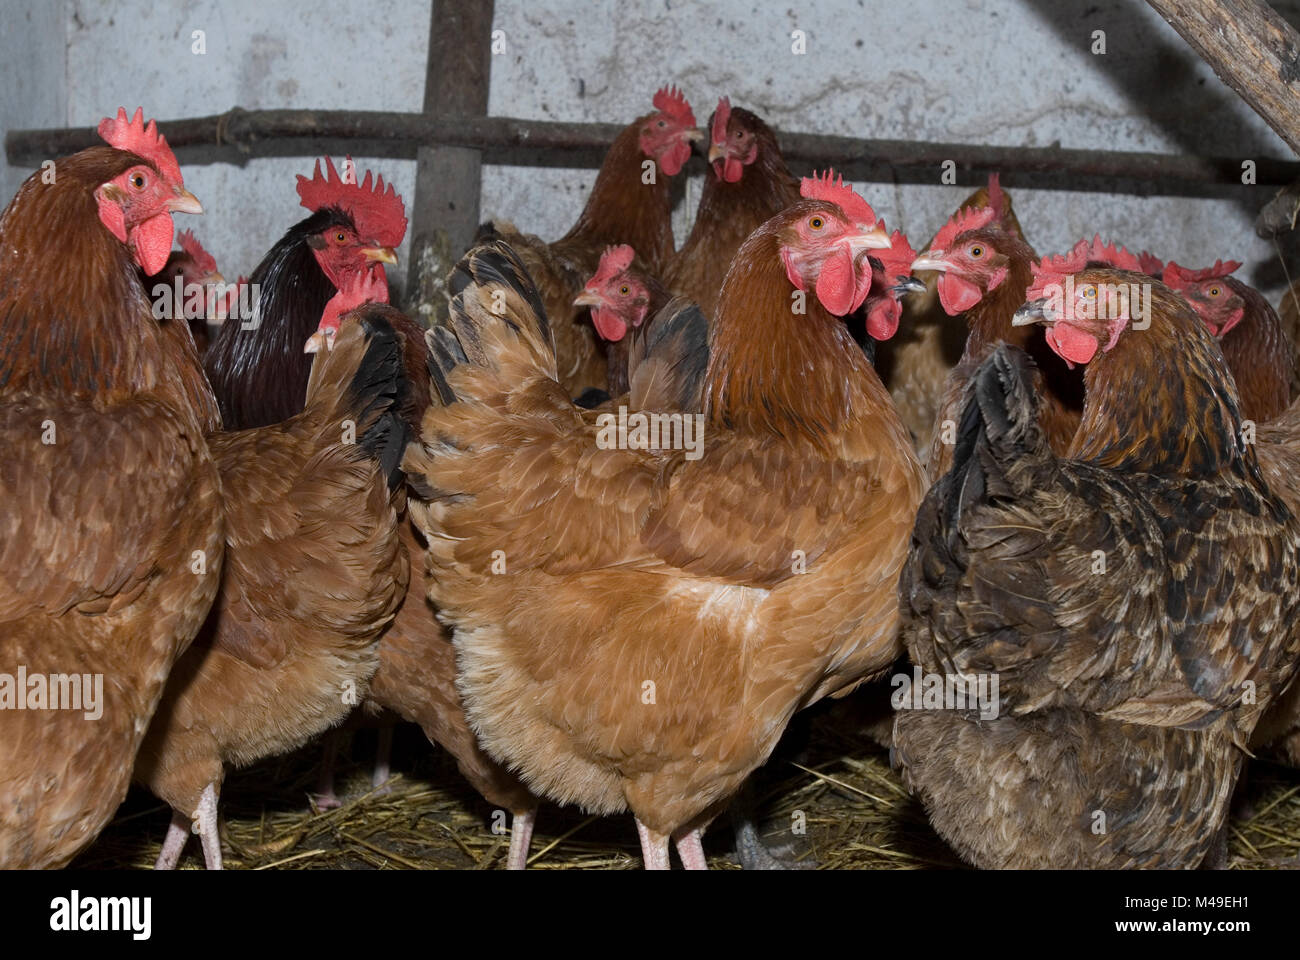 Chickens in a barn in Poland 2007 Stock Photo